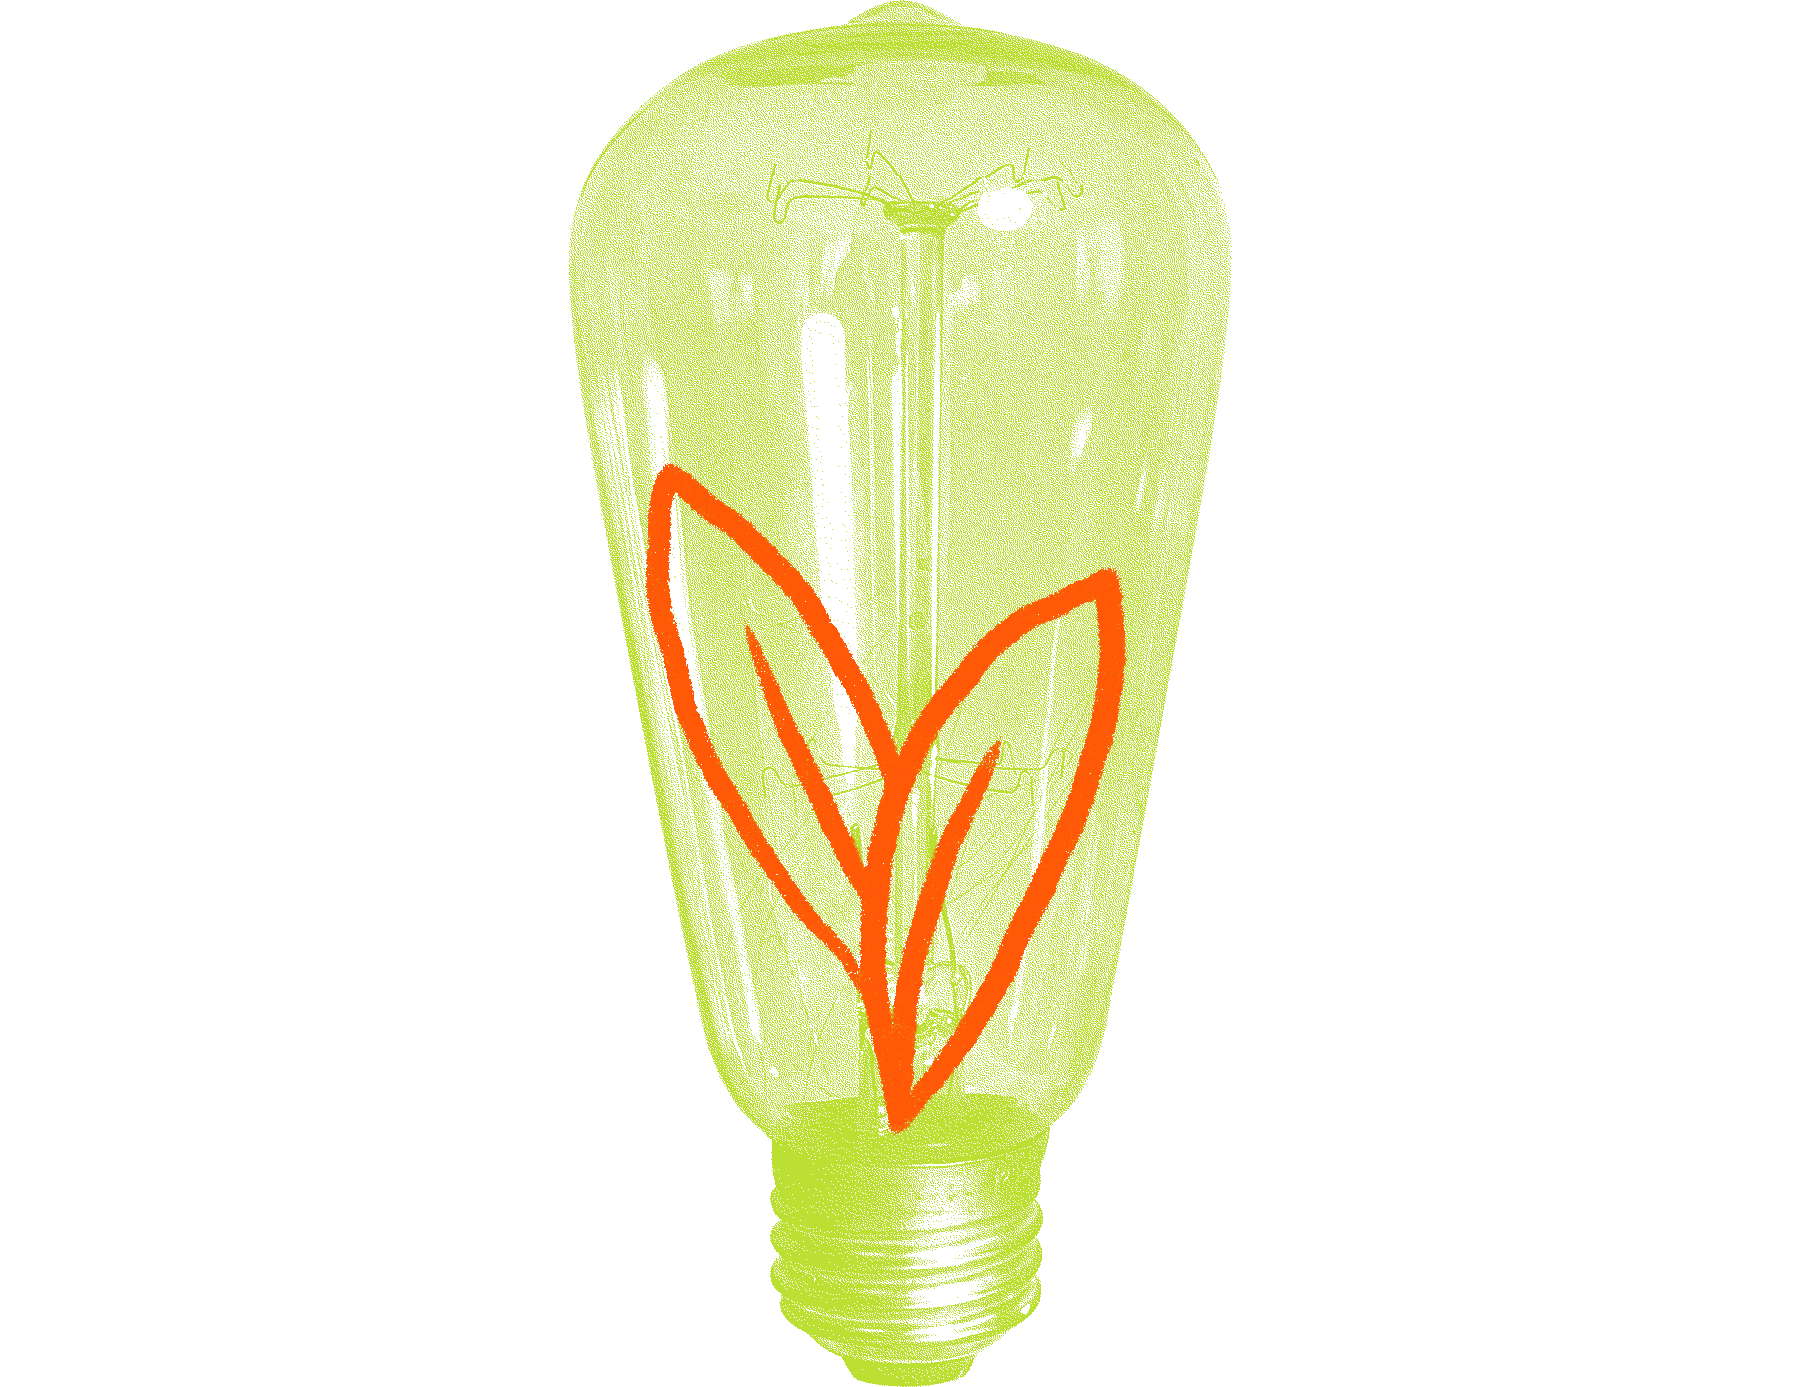 Animated graphic of a lightbulb